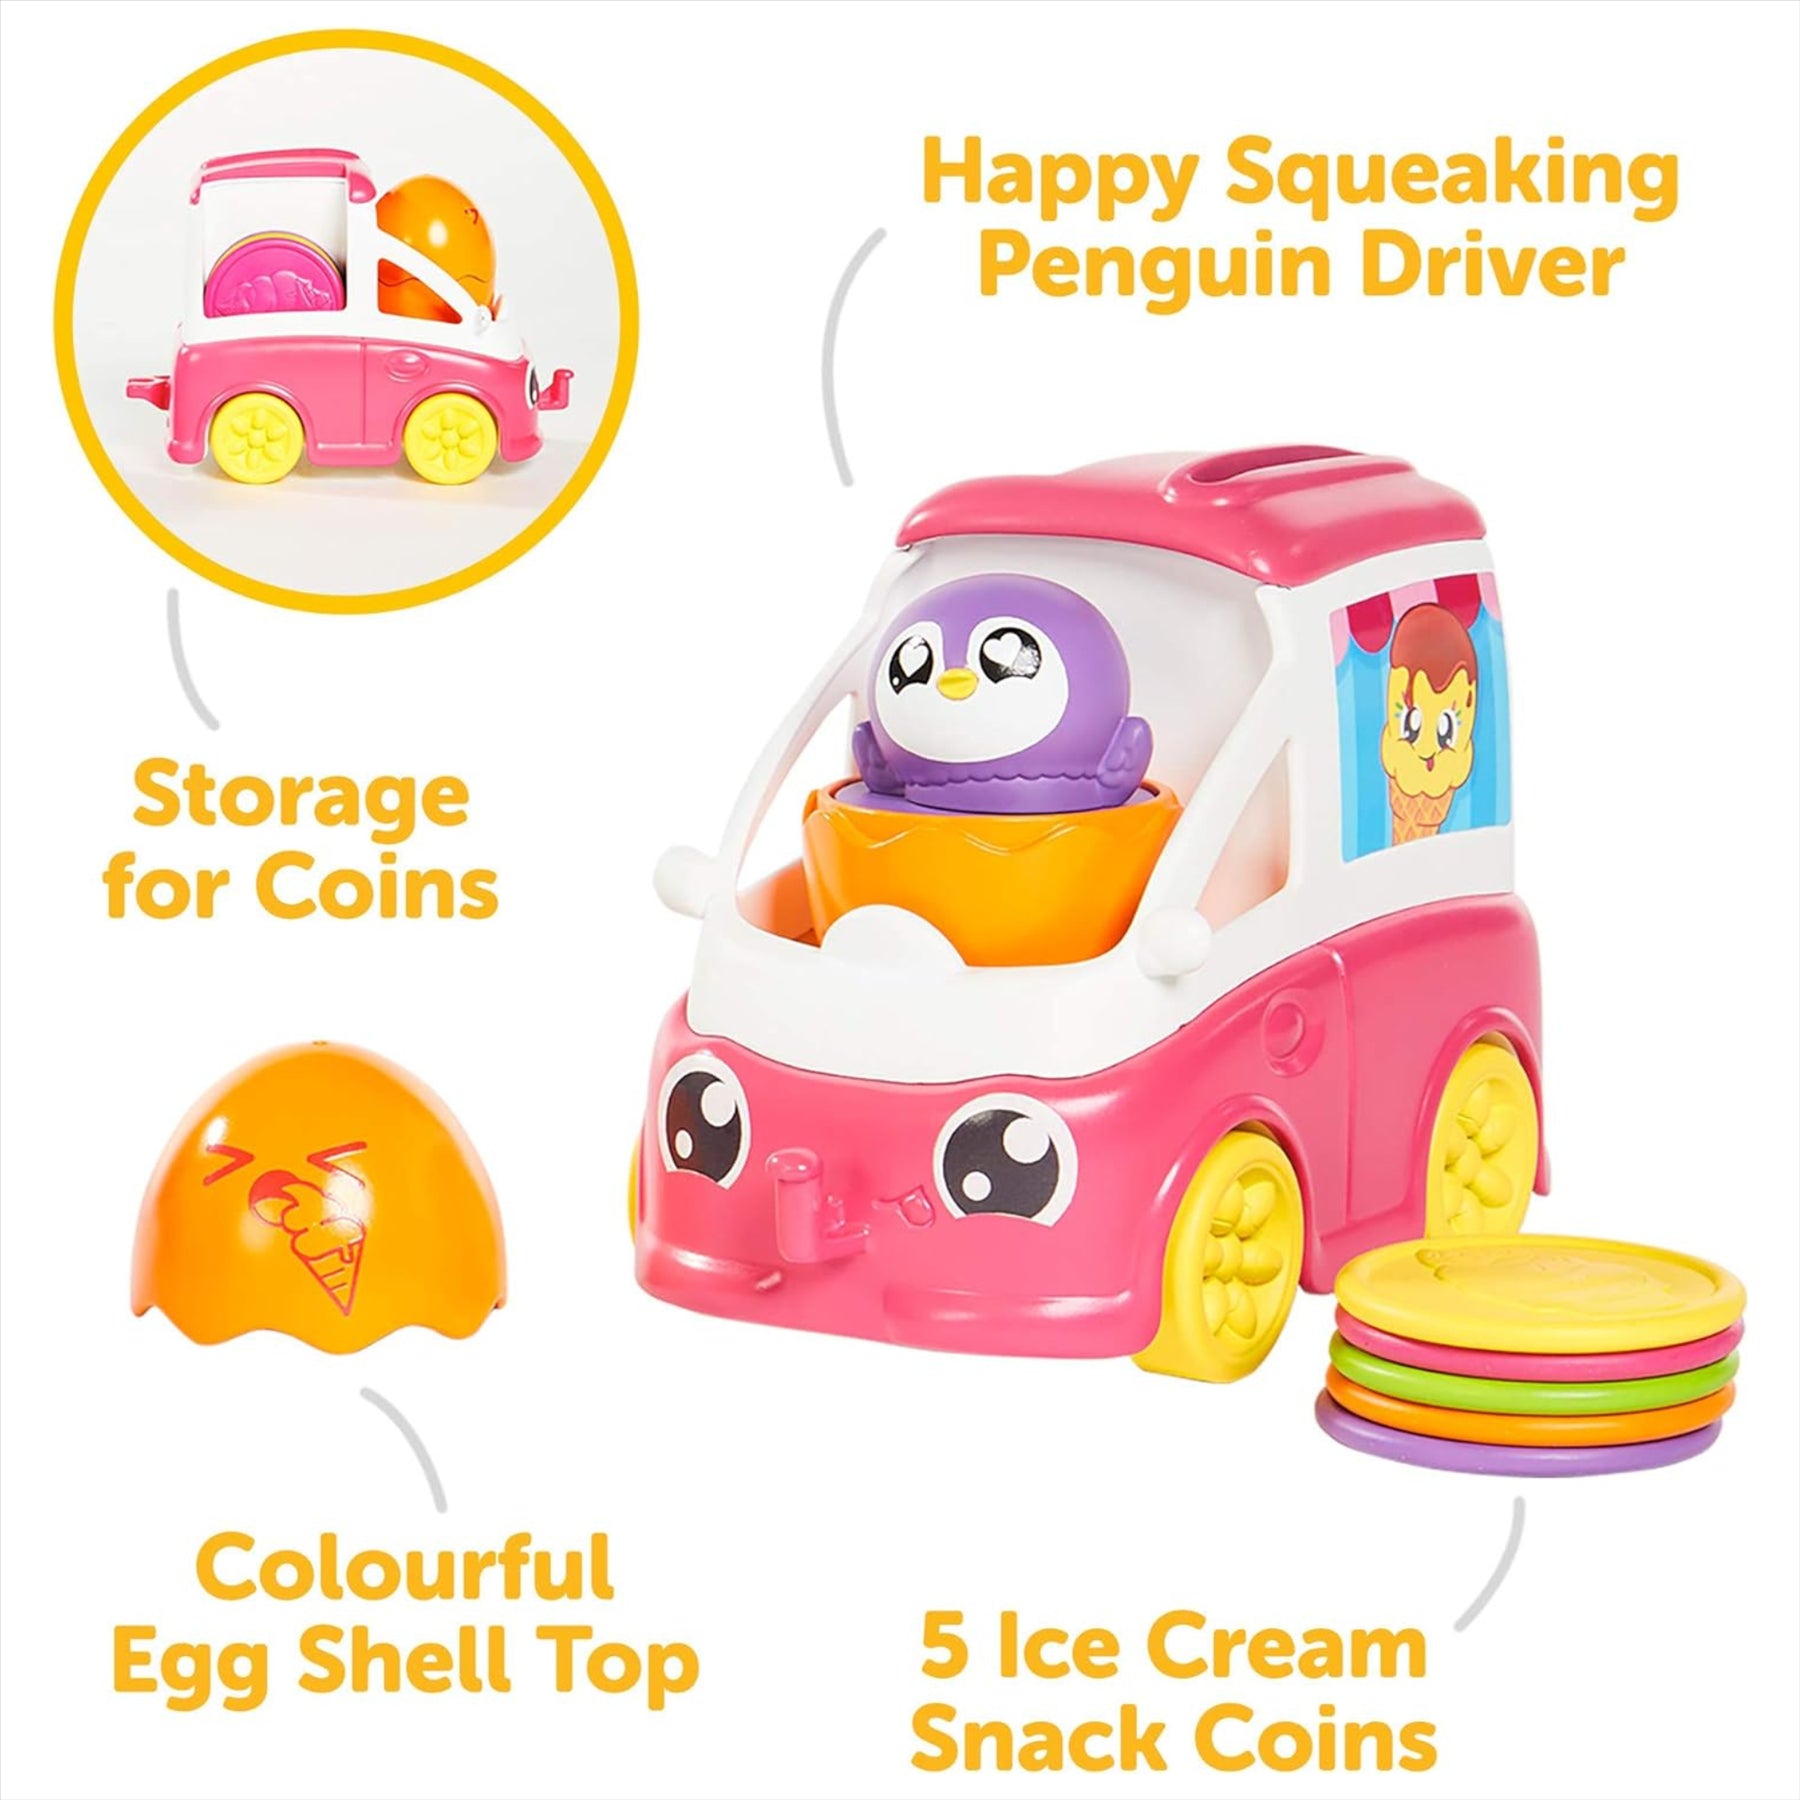 Tomy: Toomies - Fill and Pop Ice Cream Truck with Hide and Squeak Egg - Educational Push-Along Play Toy for Toddlers - Toptoys2u